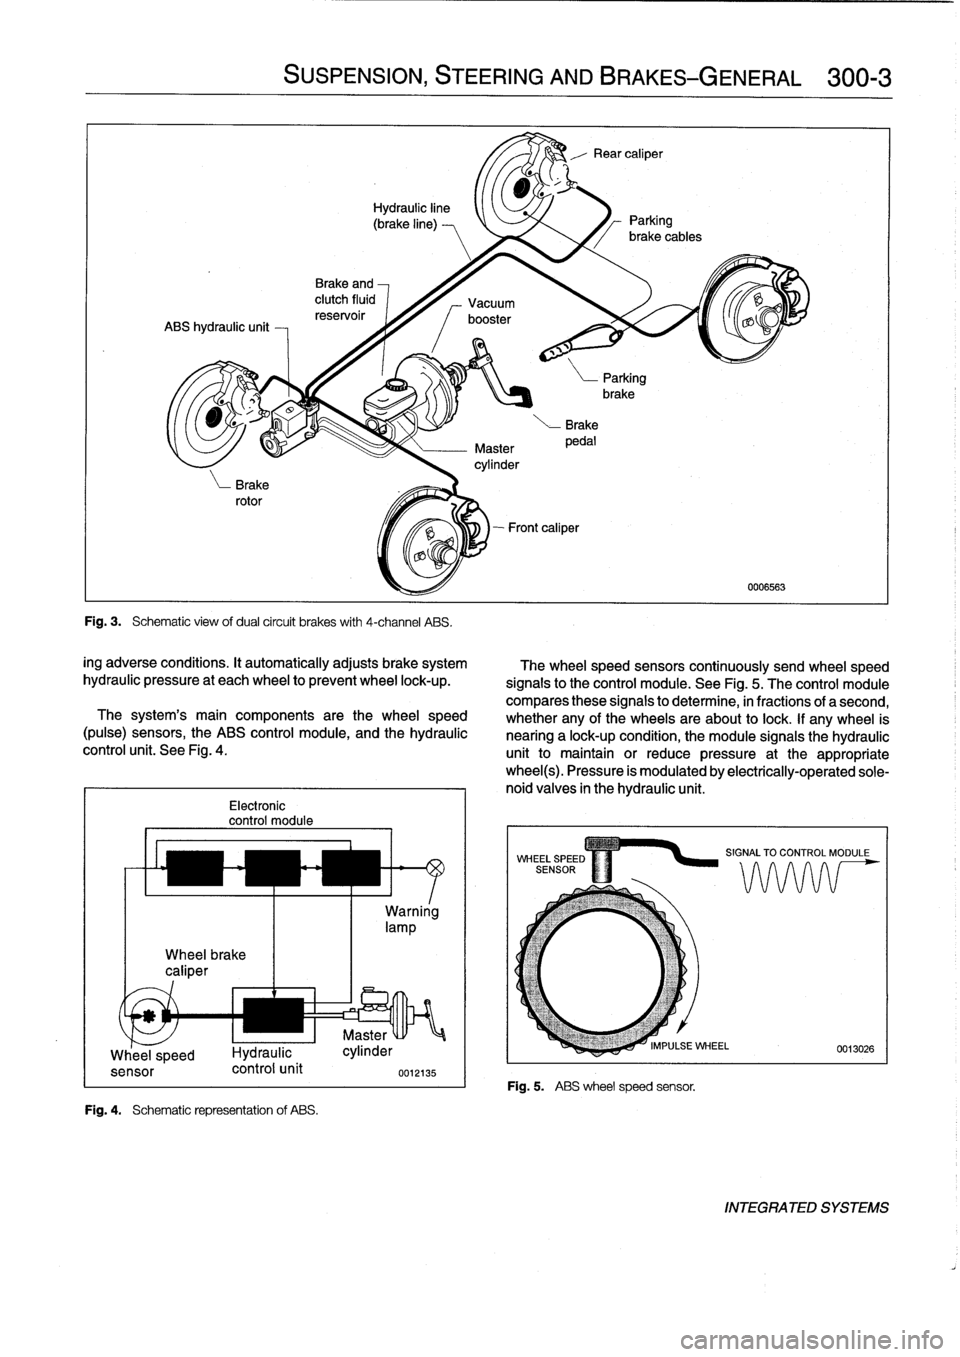 BMW 318i 1995 E36 Owners Manual 
Wheel
brake
caliper

Electronic
control
module
Fig
.
4
.

	

Schematic
representation
of
ABS
.

SUSPENSION,
STEERING
ANDBRAKES-GENERAL

	

300-3

Fig
.
3
.

	

Schematic
view
ofdual
circuit
brakes
wi